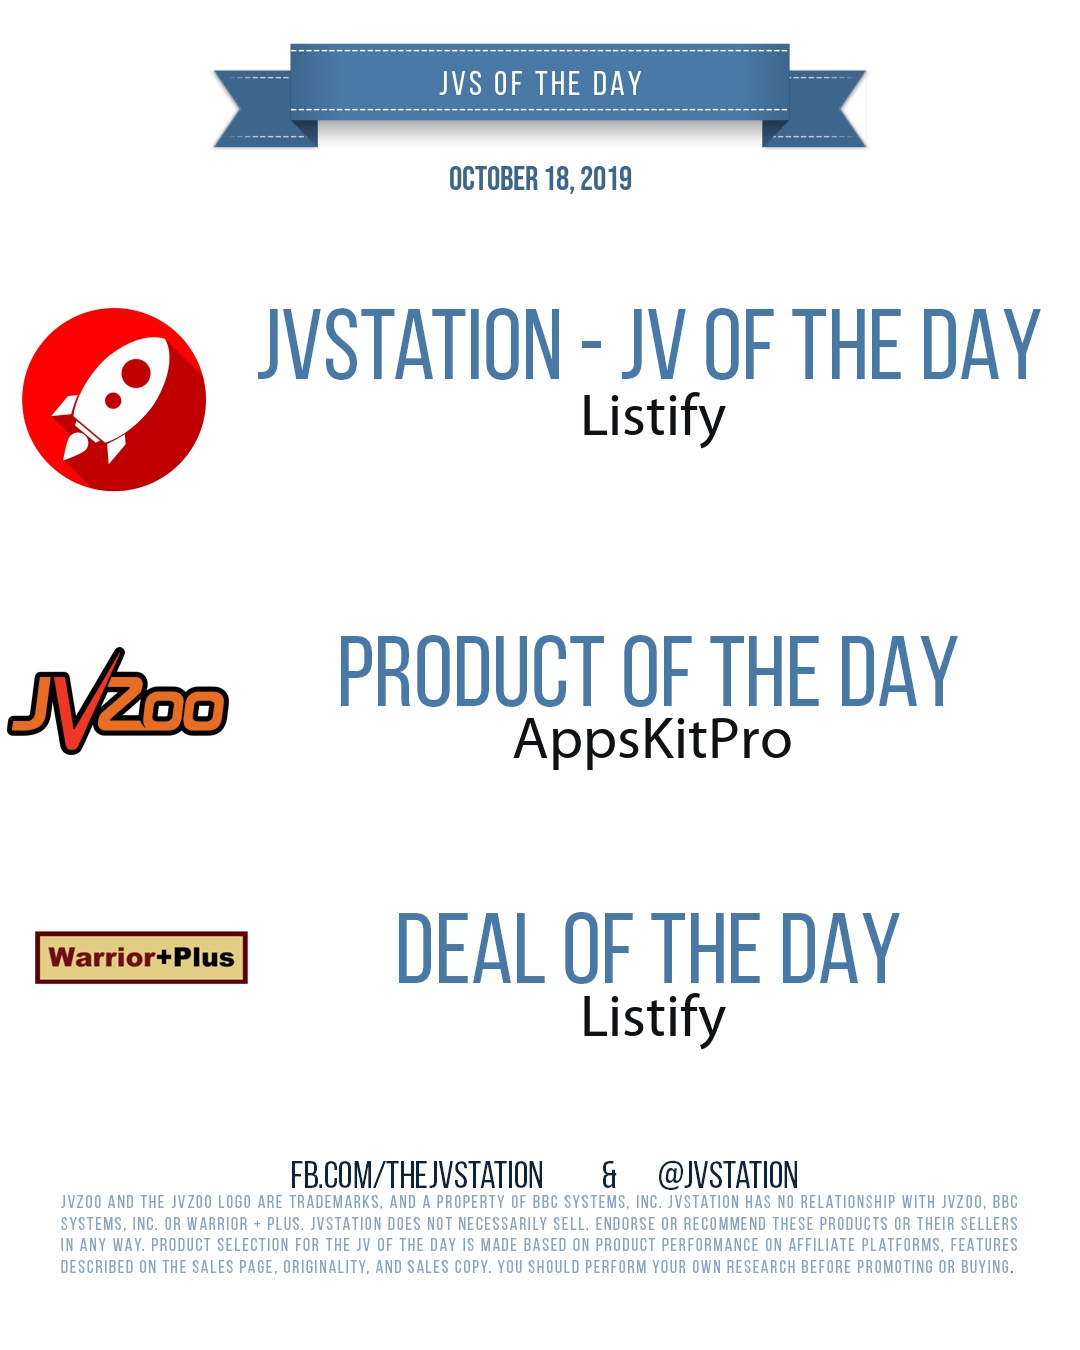 JVs of the day - October 18, 2019